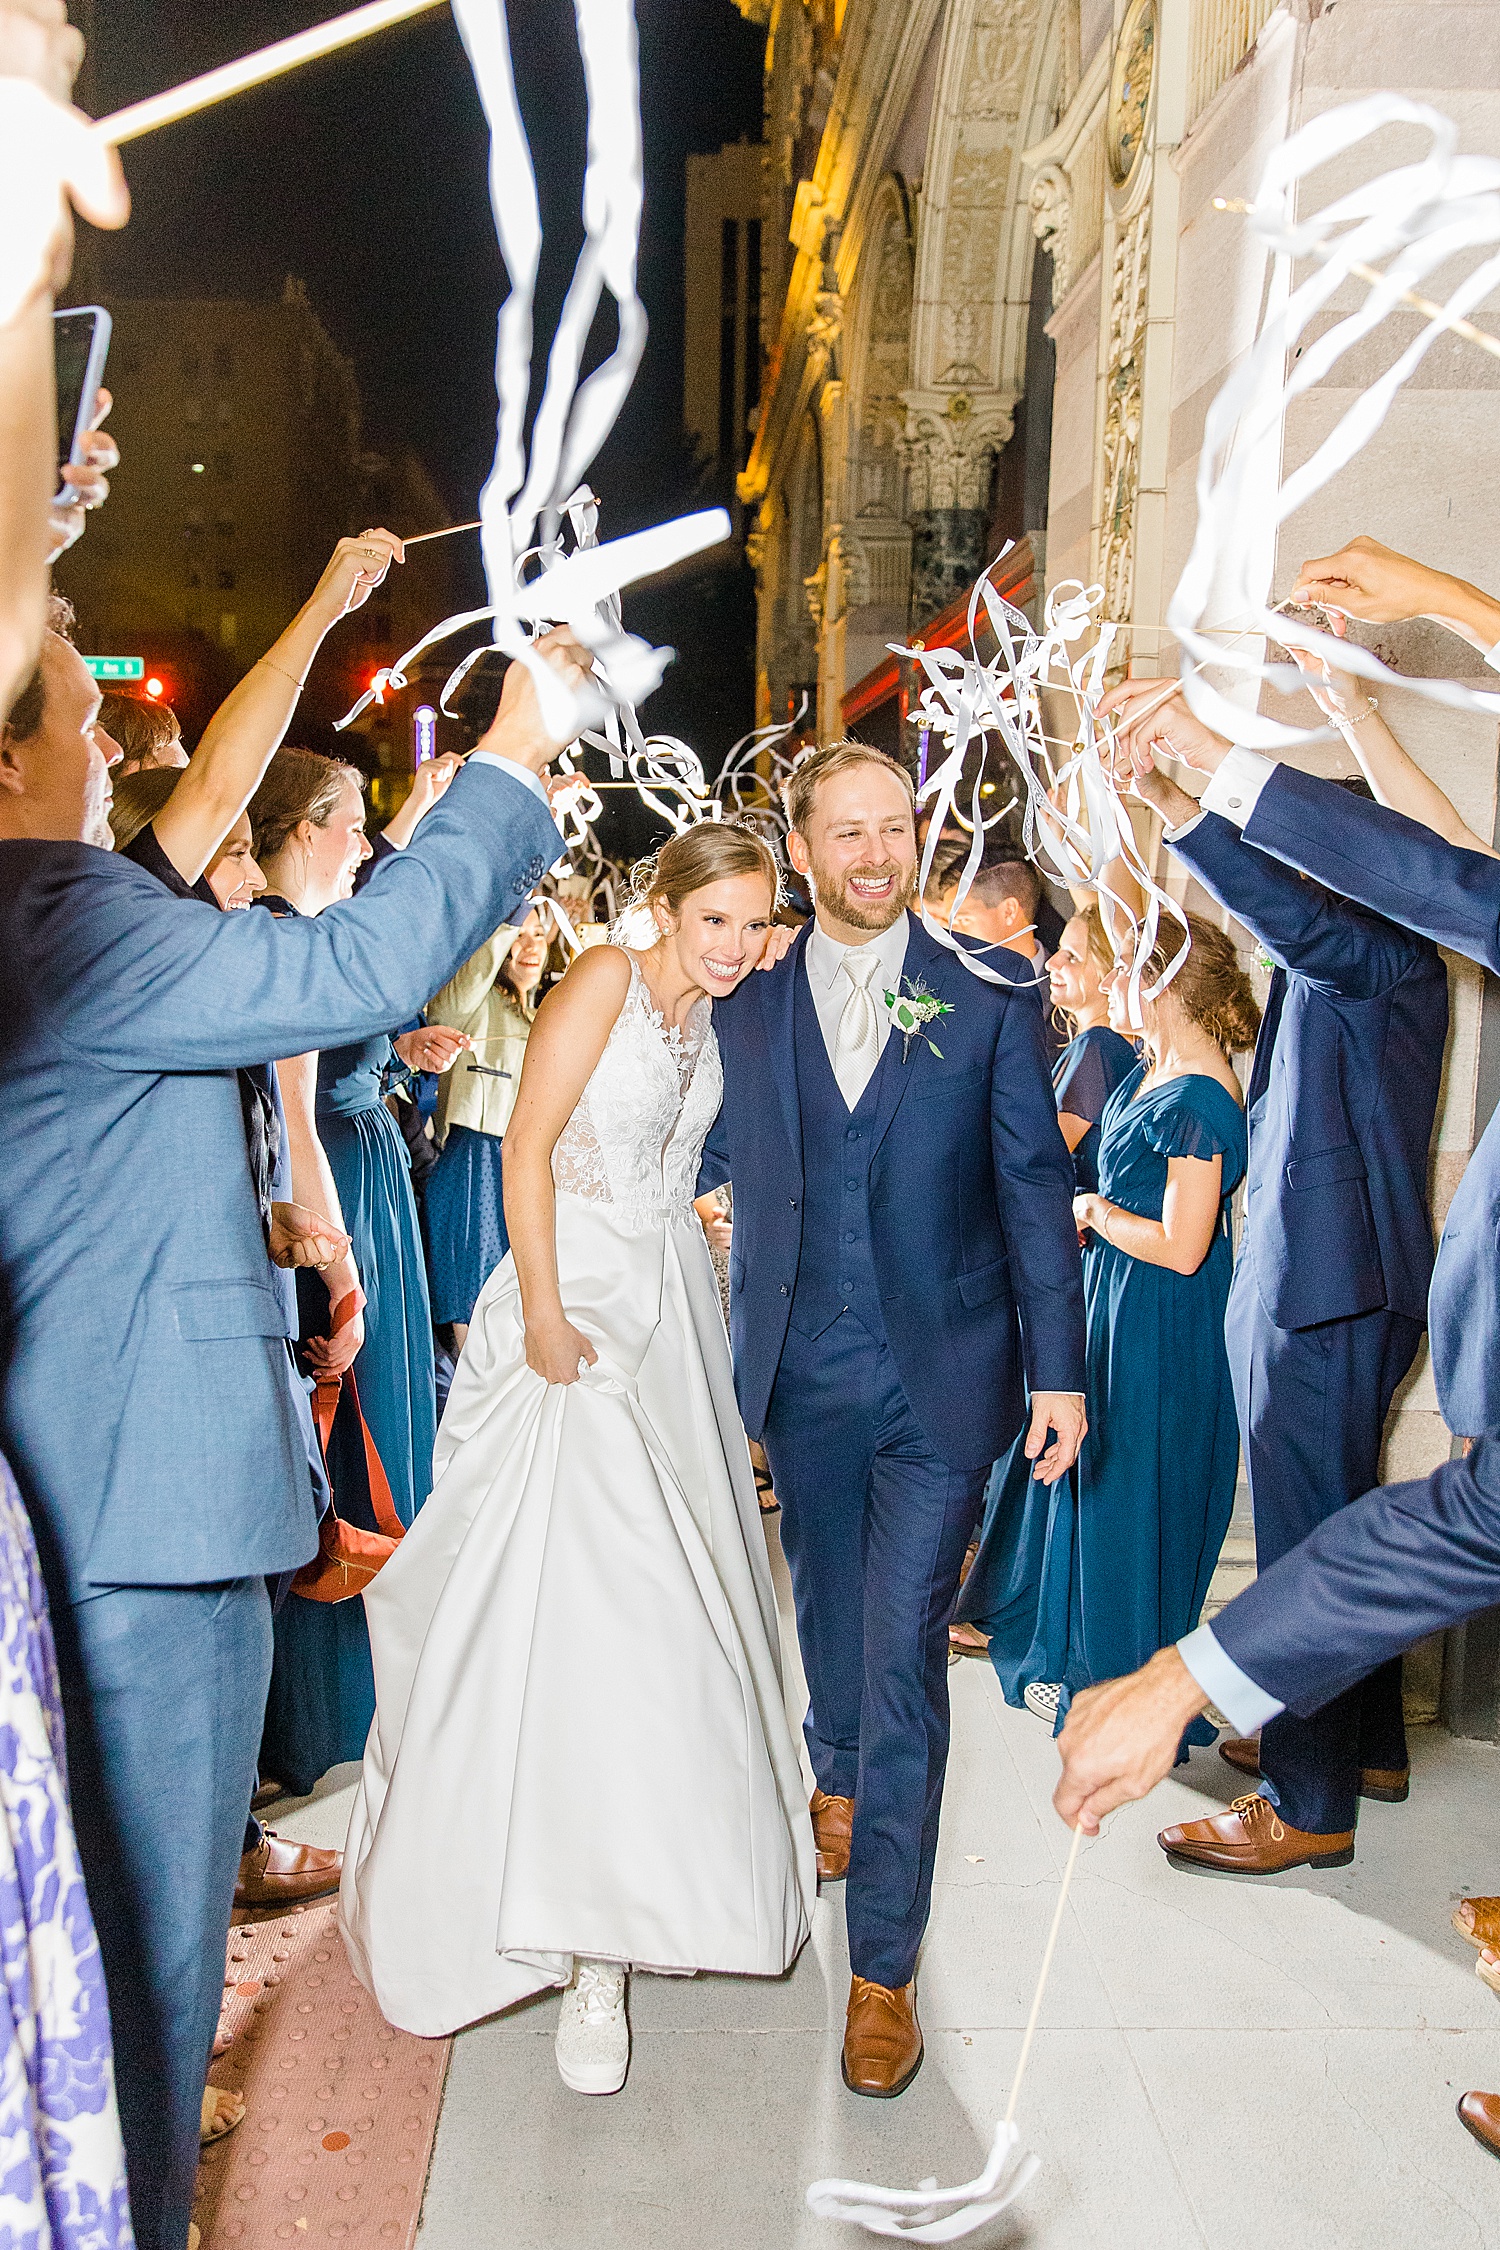 newlyweds at the end of their wedding night as wedding guests wave streamers